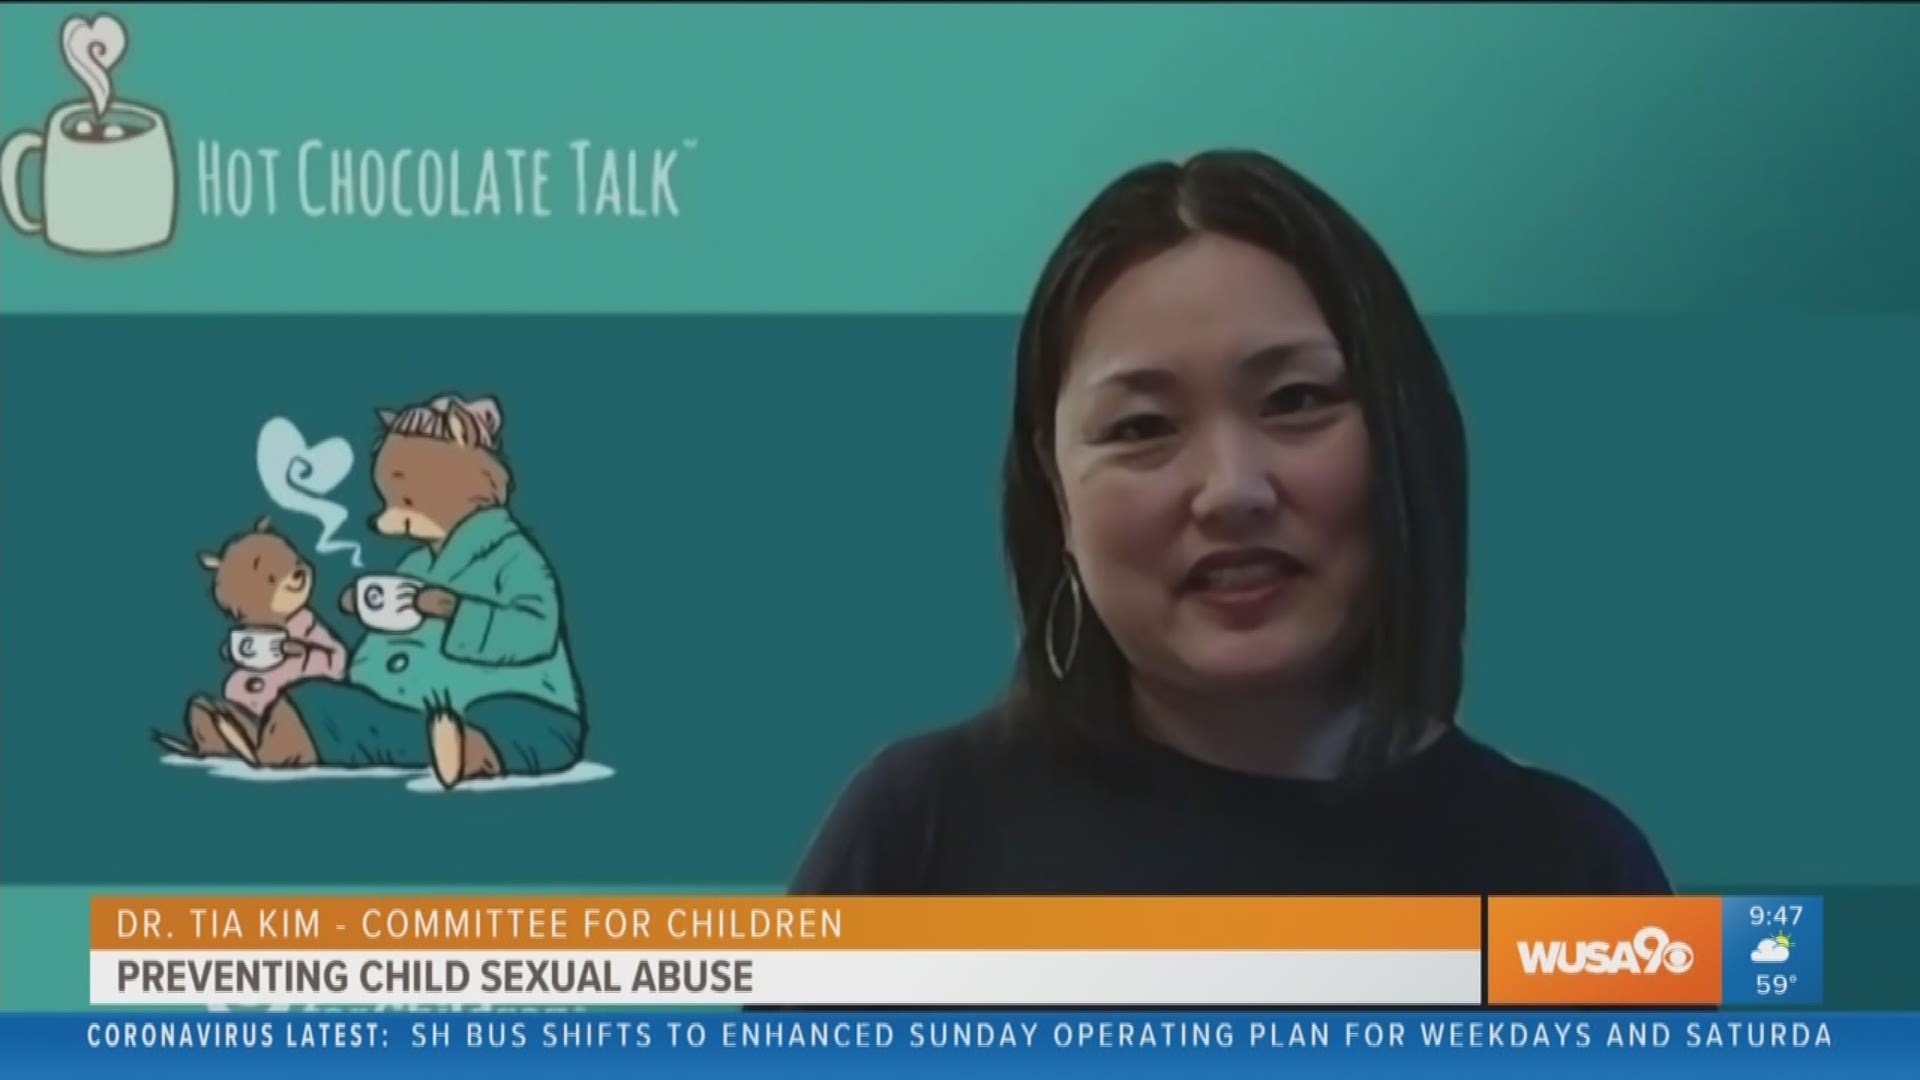 Dr. Tia Kim of the Committee for Children shares how just talking to your kids about sexual abuse is a huge way to help prevent it.